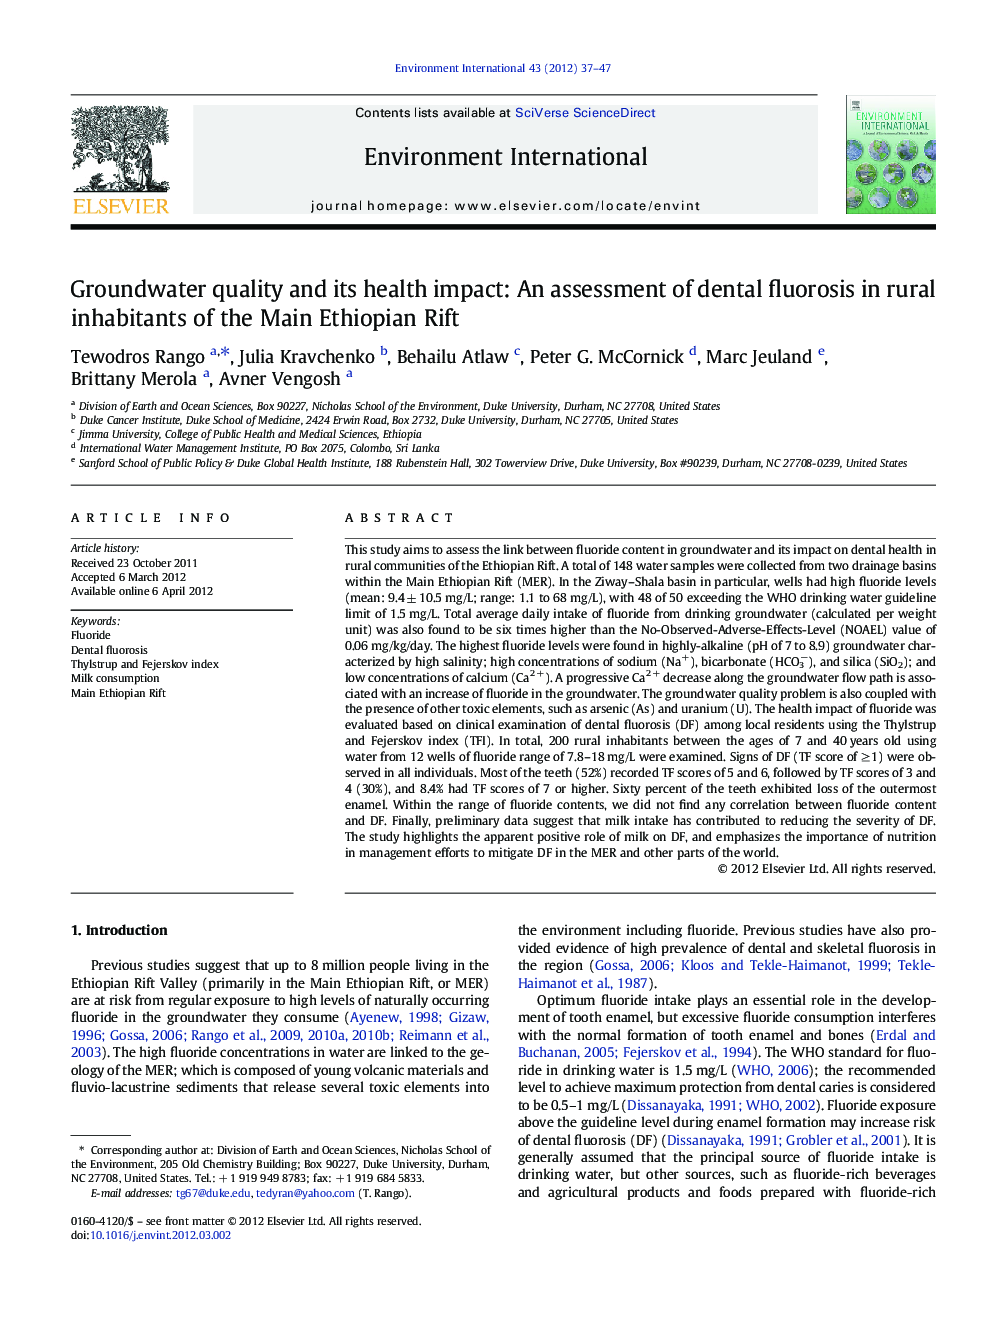 Groundwater quality and its health impact: An assessment of dental fluorosis in rural inhabitants of the Main Ethiopian Rift